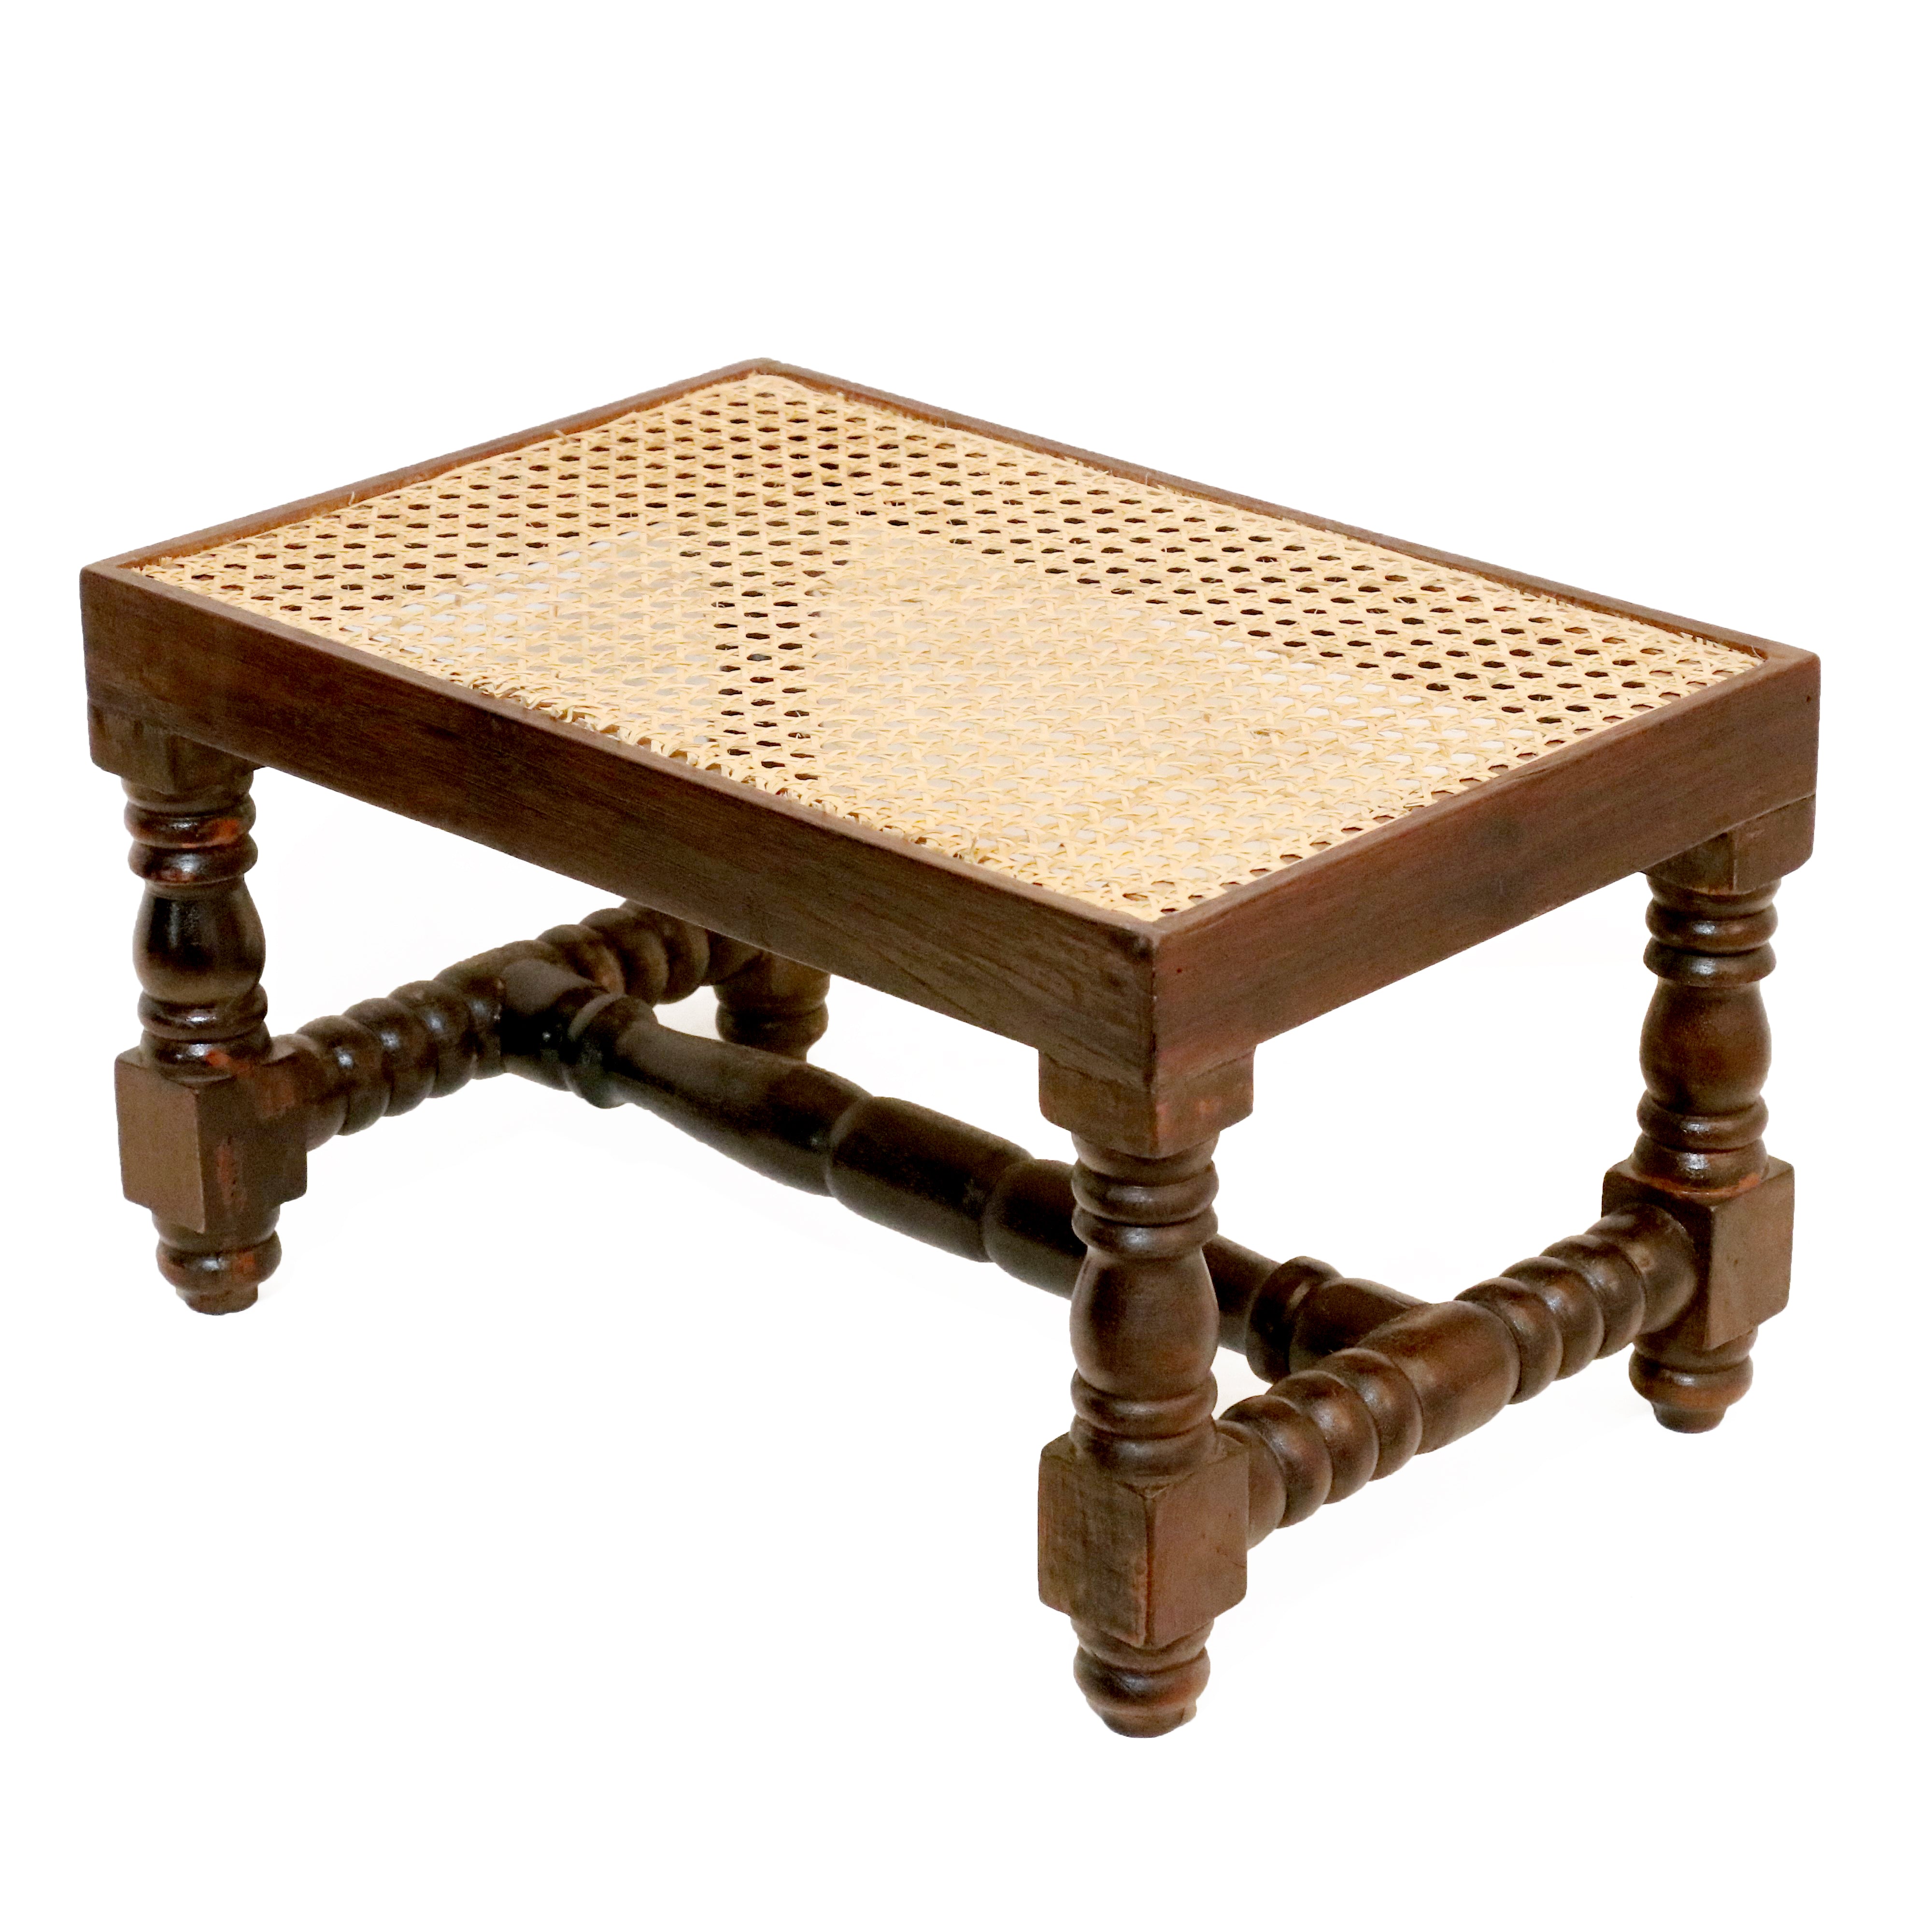 Solid Wooden Intricate Cane Stool Stool